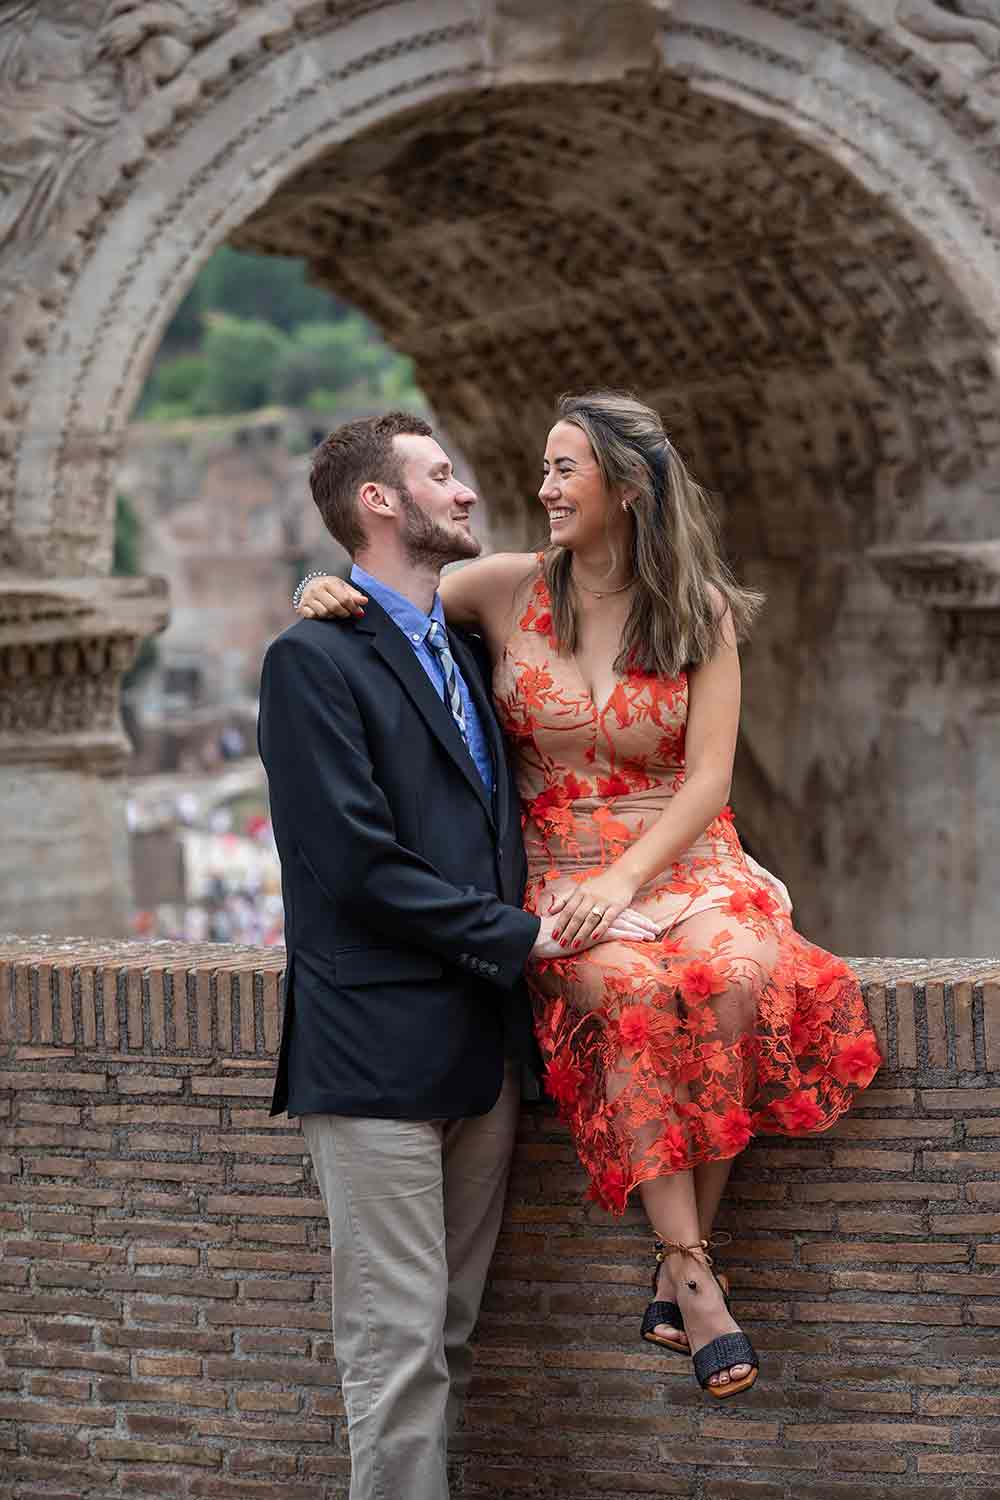 Couple portrait taken underneath the Arch of Septimius Severus while sitting down on a small brick wall 